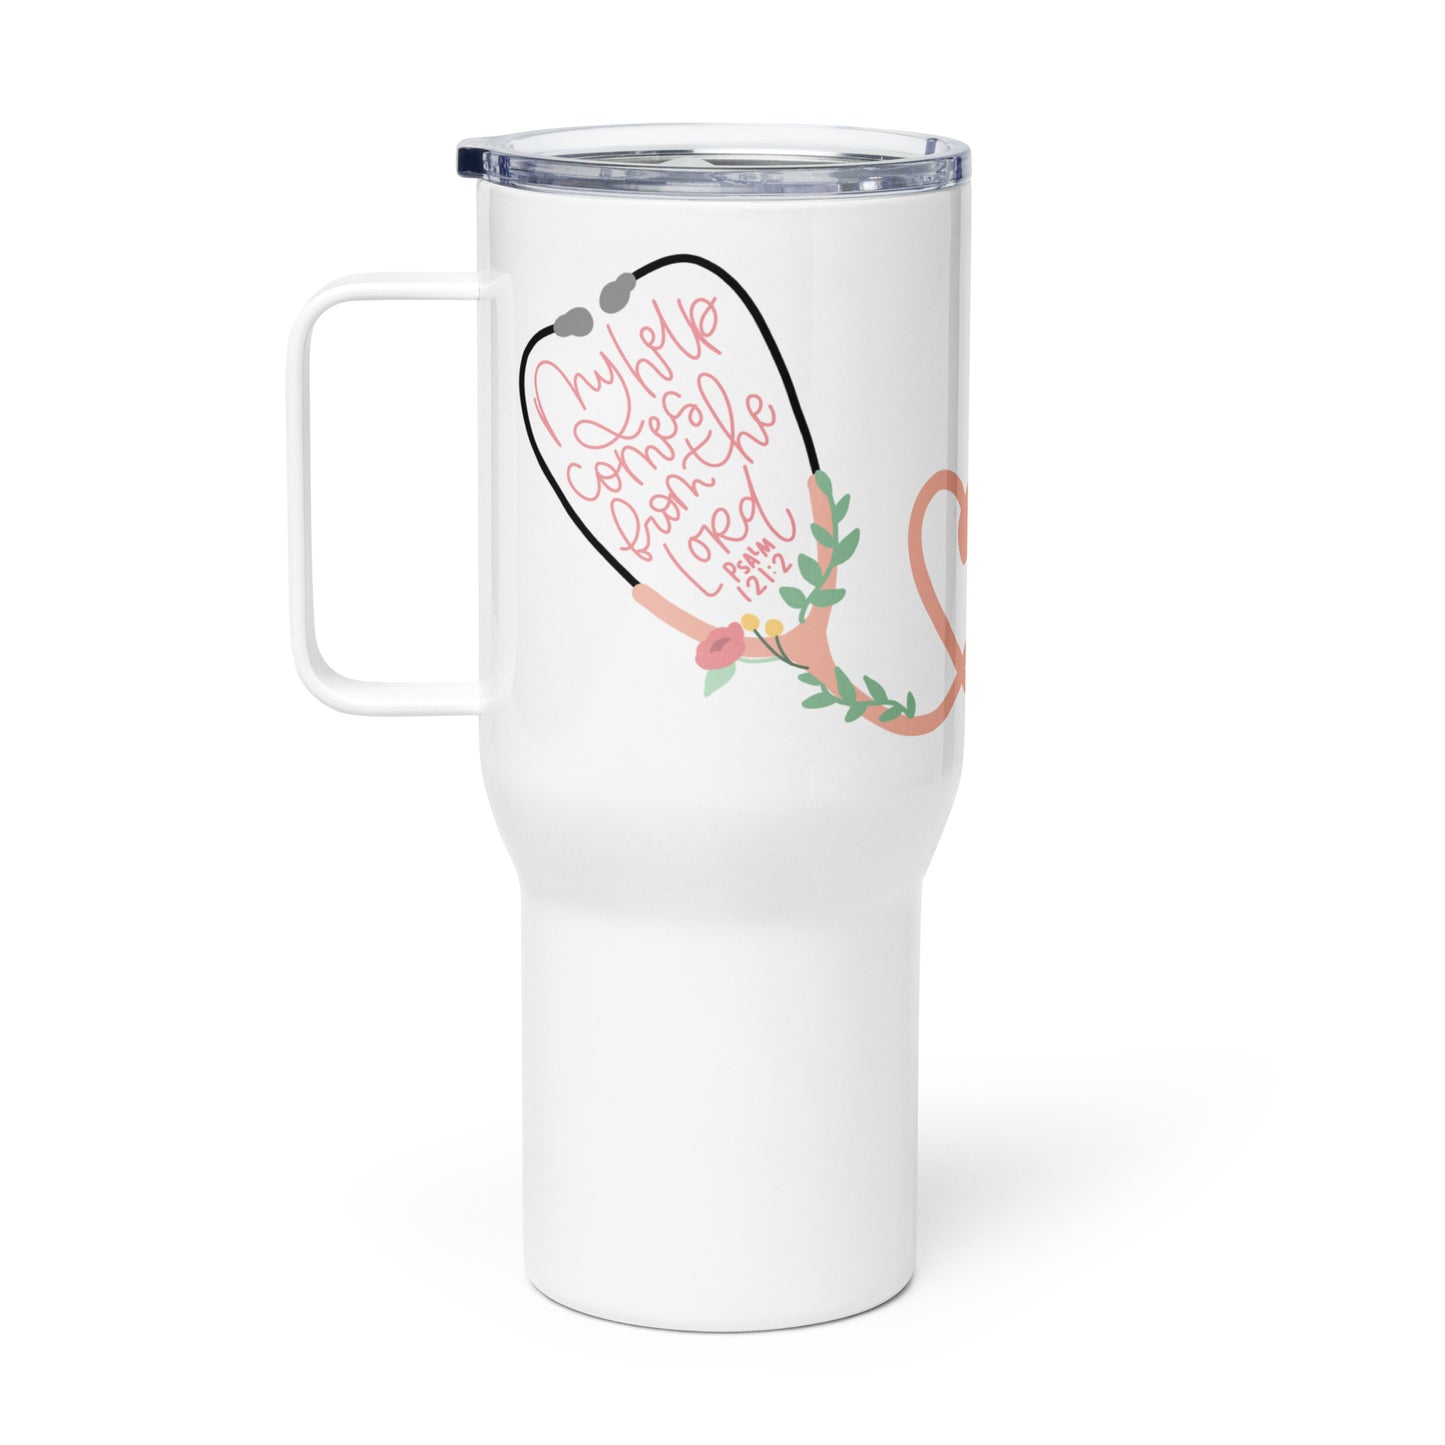 My Help Comes From the Lord Stainless Steel Nurse Tumbler